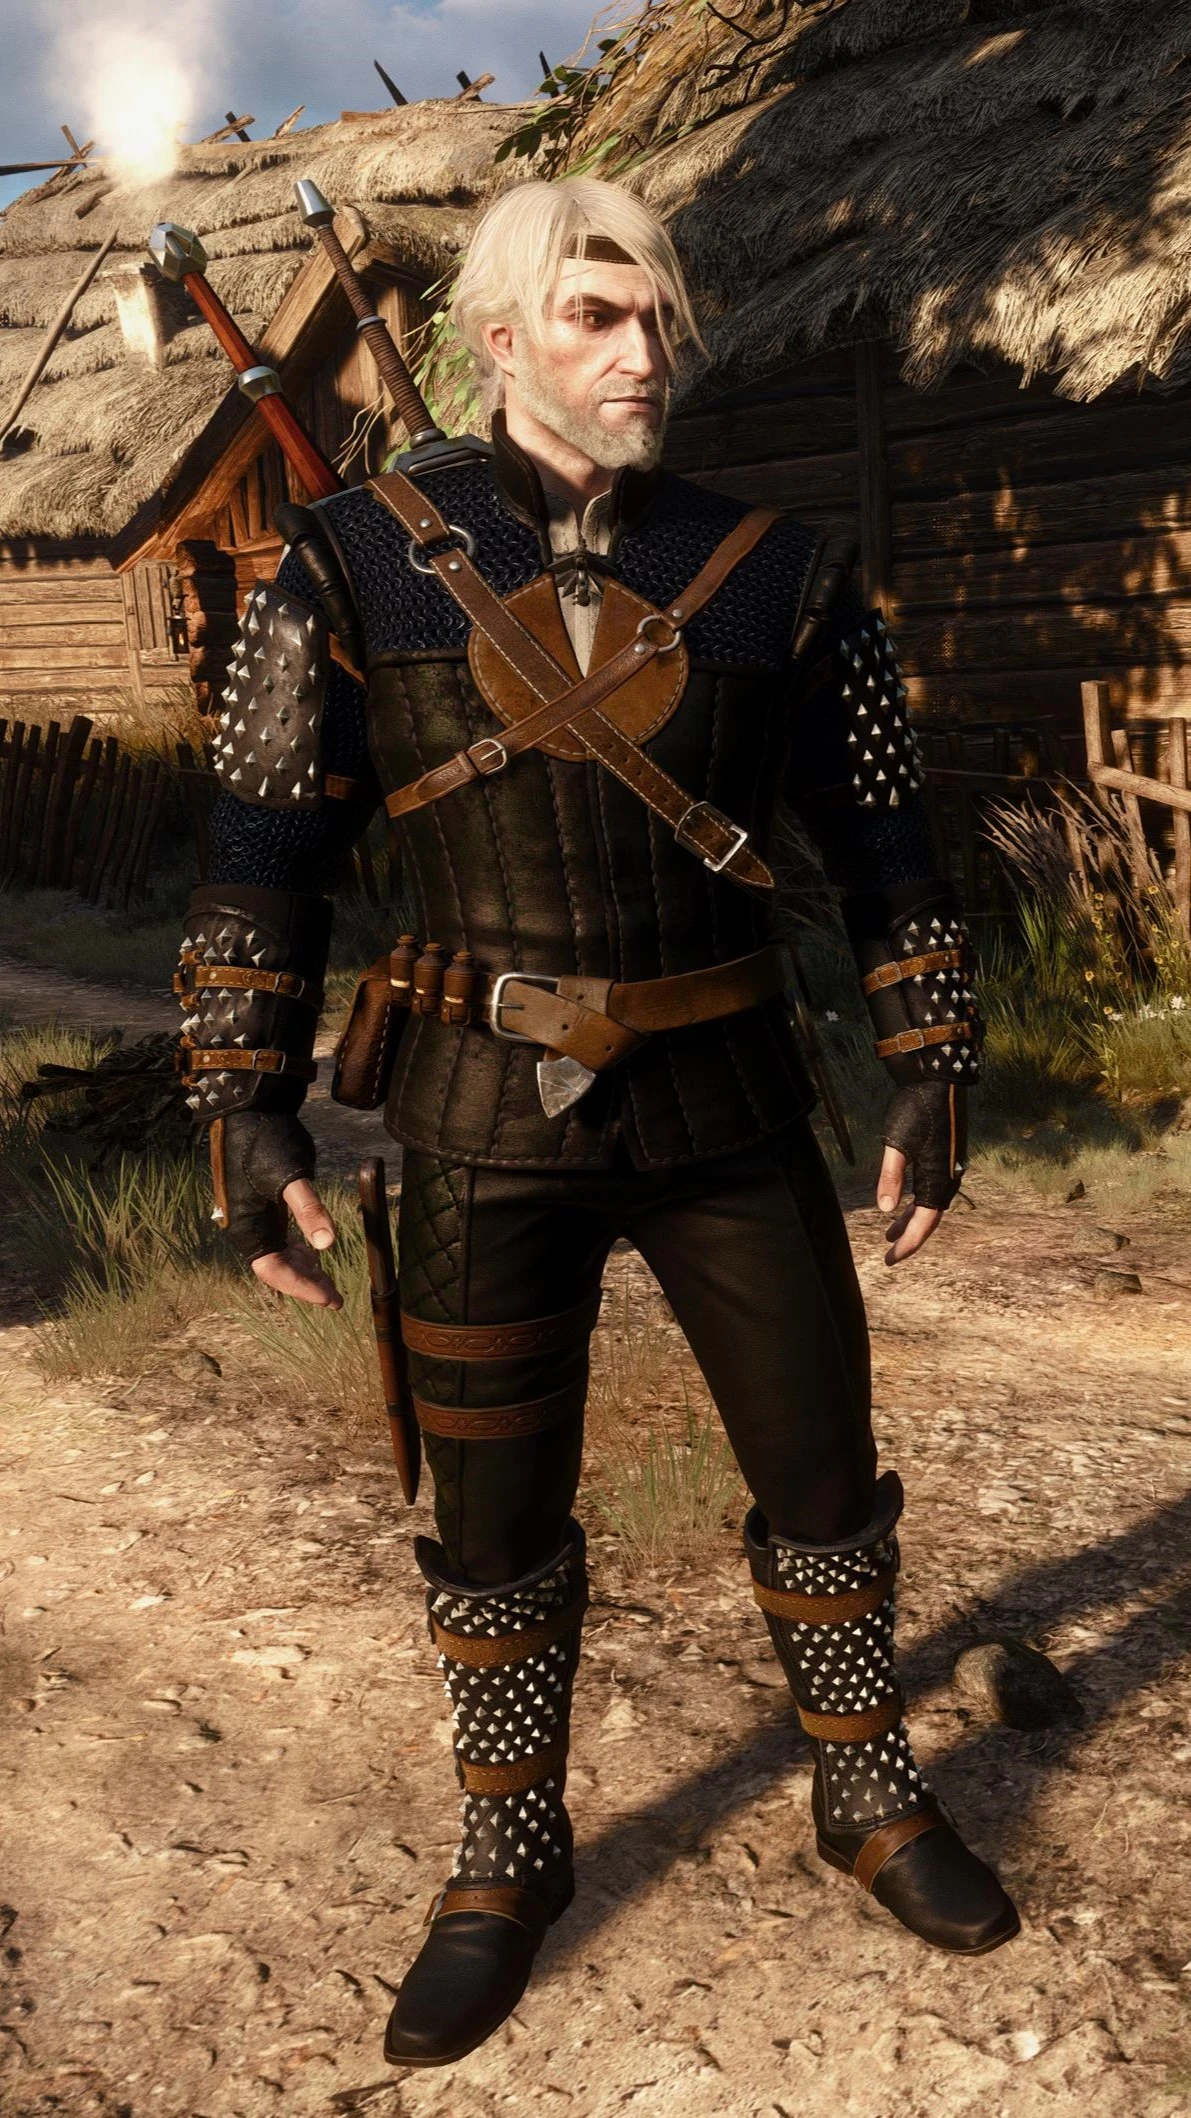 Leather Headbands (Next-Gen) at The Witcher 3 Nexus - Mods and community